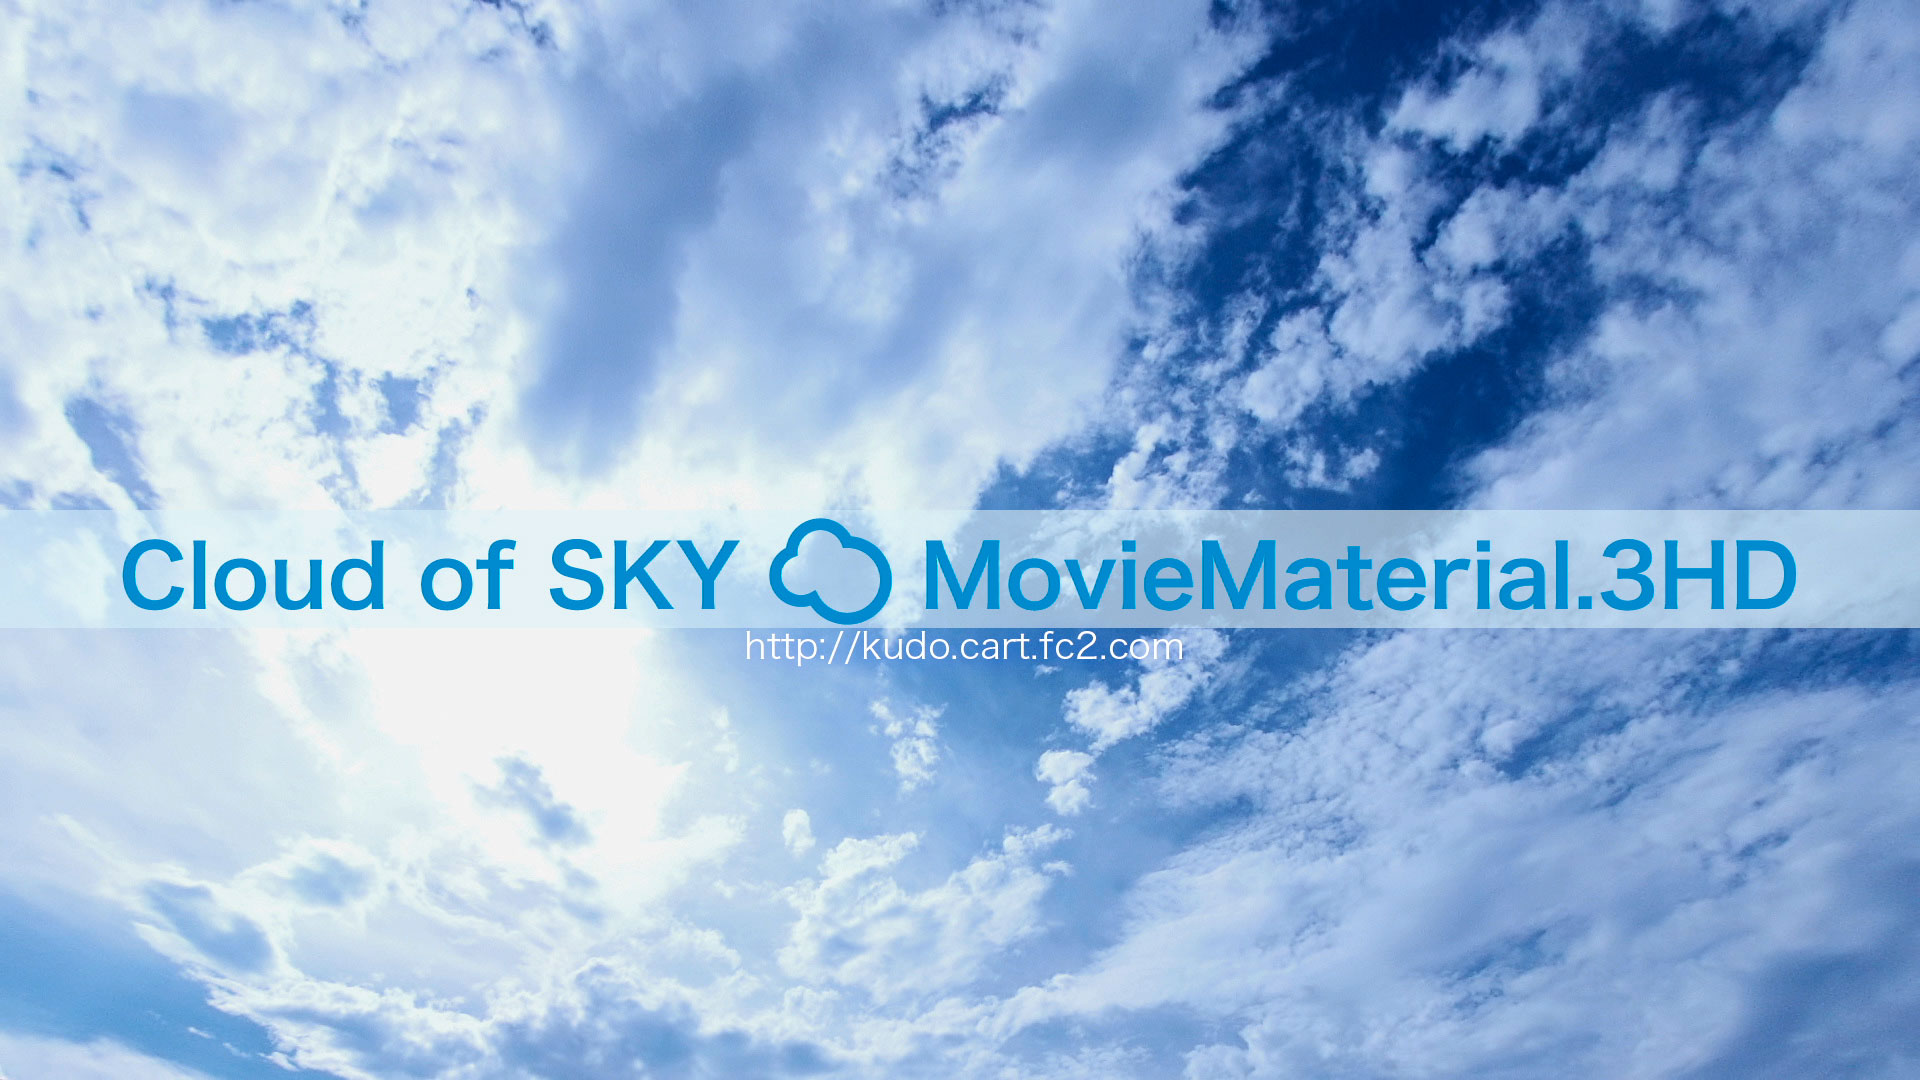 【Cloud of SKY MovieMaterial.HDSET】 ロイヤリティフリー フルハイビジョン動画素材集 Image.9